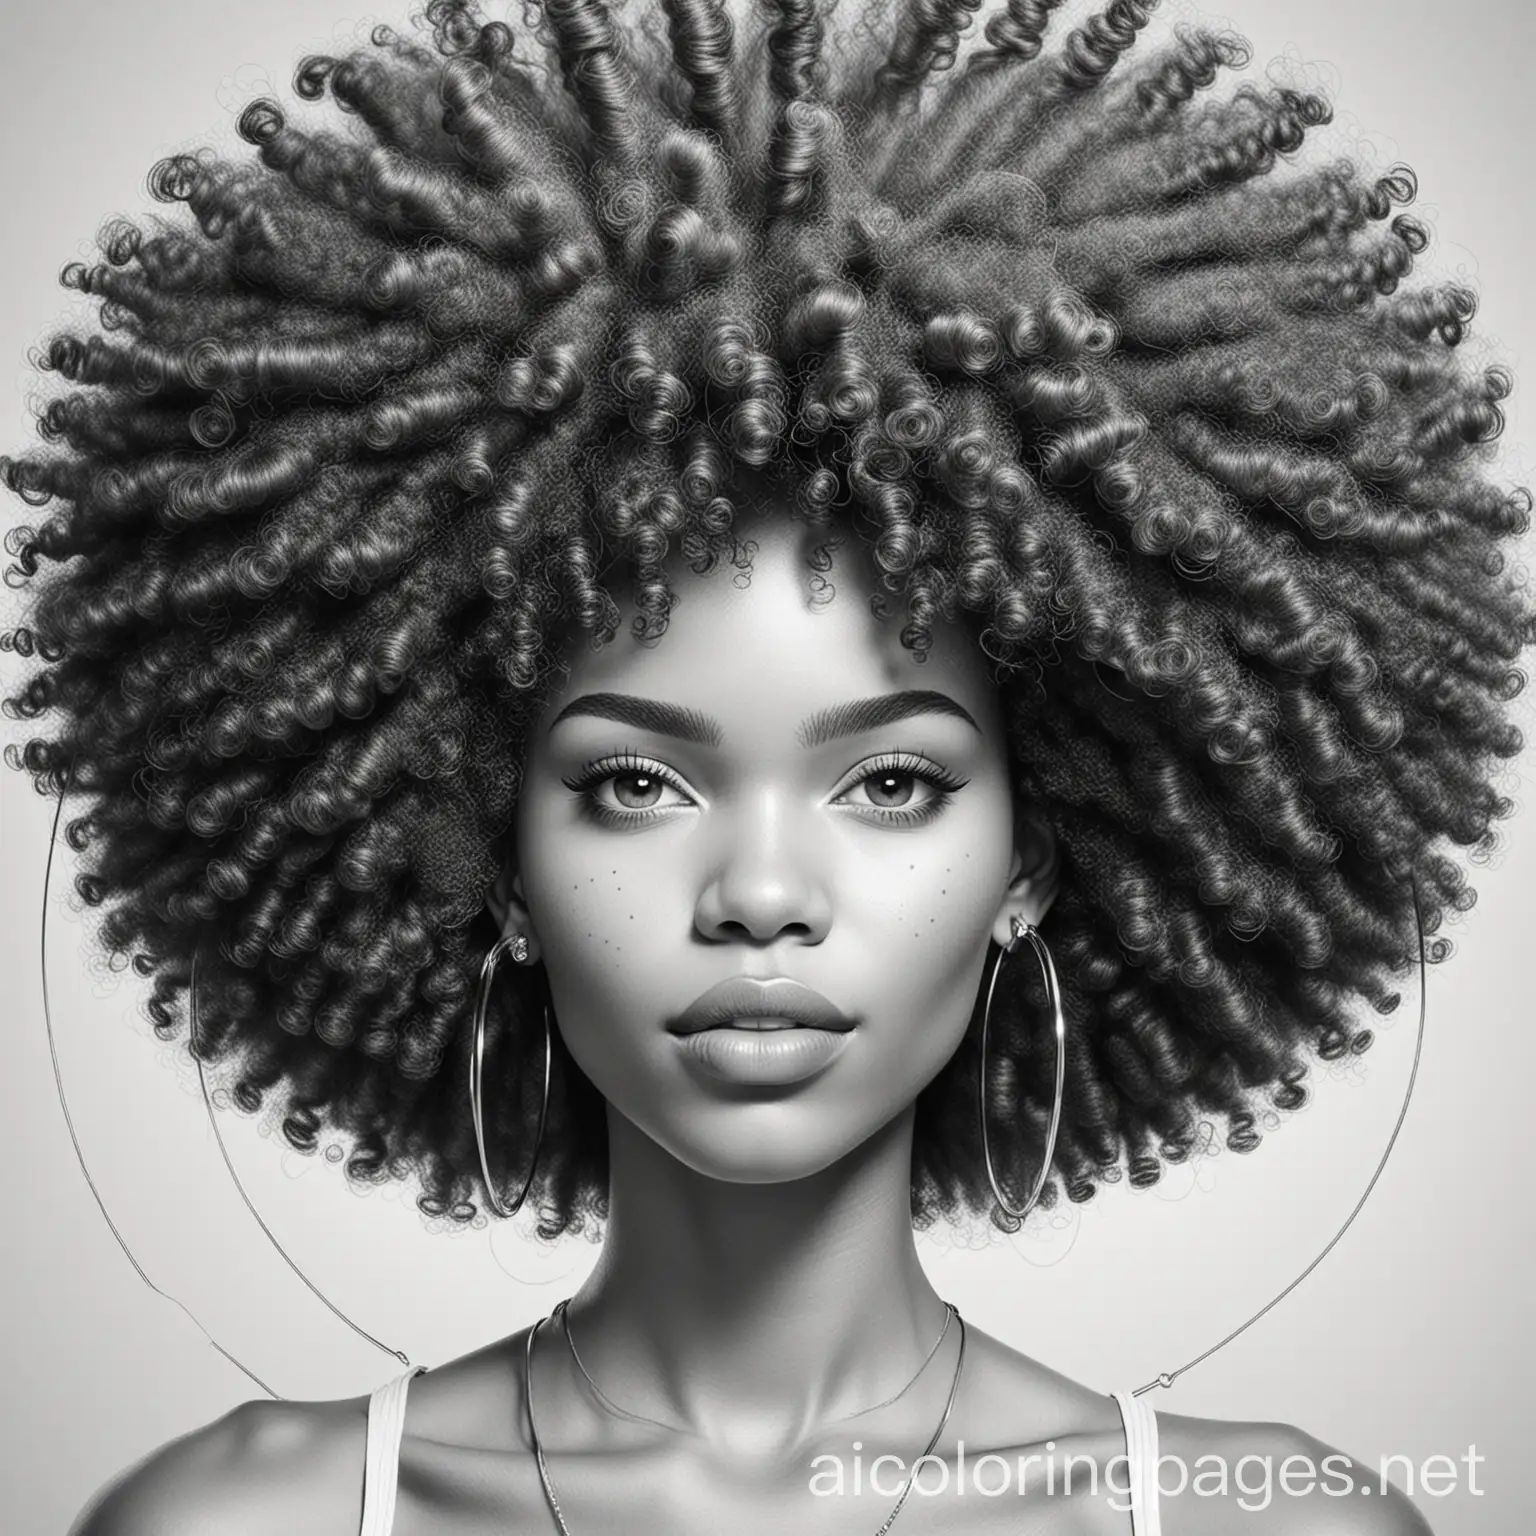 Black woman with large hoop earrings and large afro, Coloring Page, black and white, line art, white background, Simplicity, Ample White Space. The background of the coloring page is plain white to make it easy for young children to color within the lines. The outlines of all the subjects are easy to distinguish, making it simple for kids to color without too much difficulty